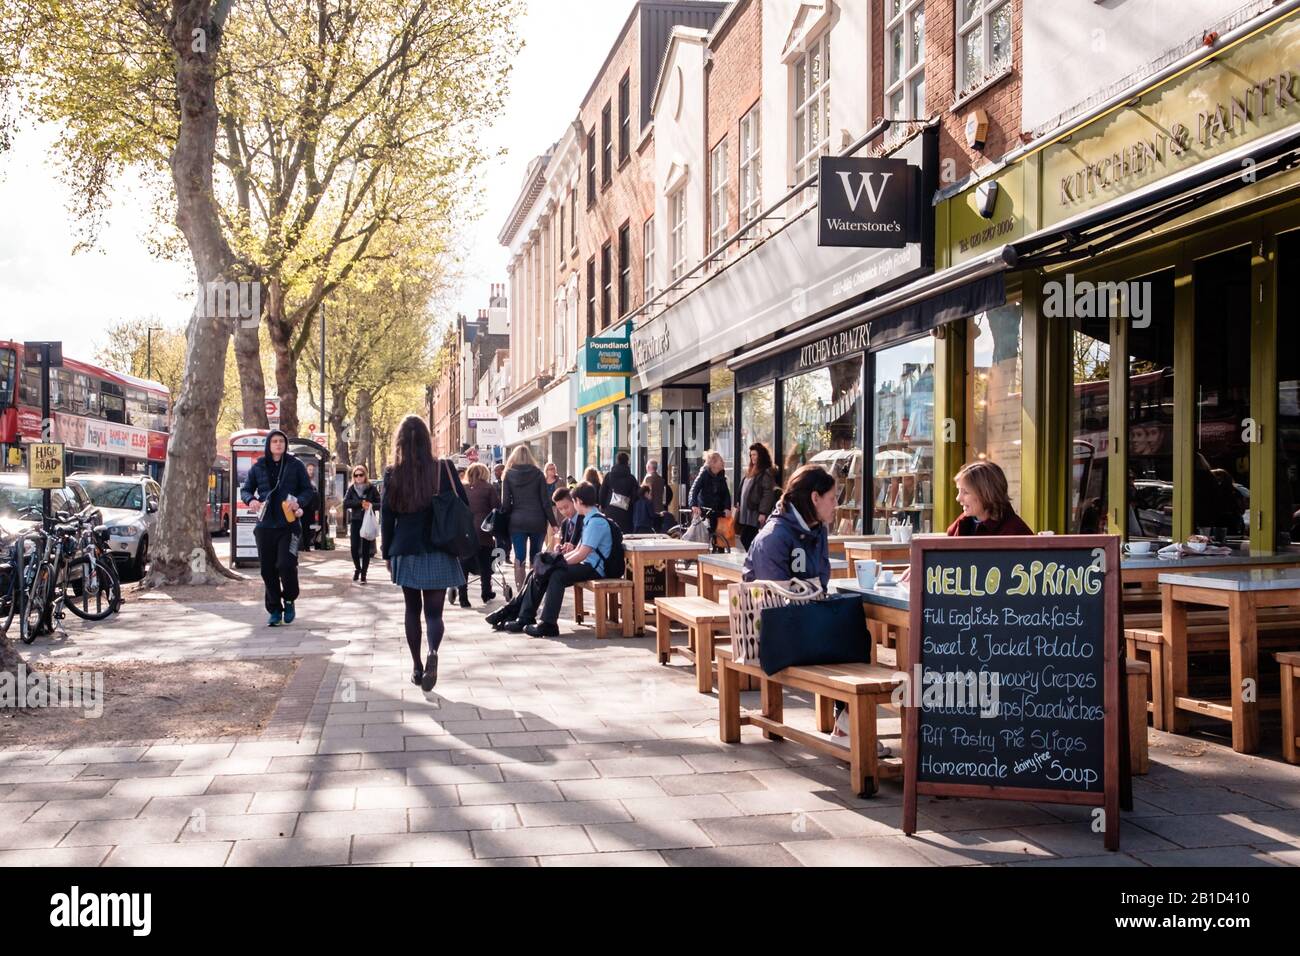 Pedestrians and restaurant patrons on Chiswick High Street on a sunny spring day, London, England Stock Photo